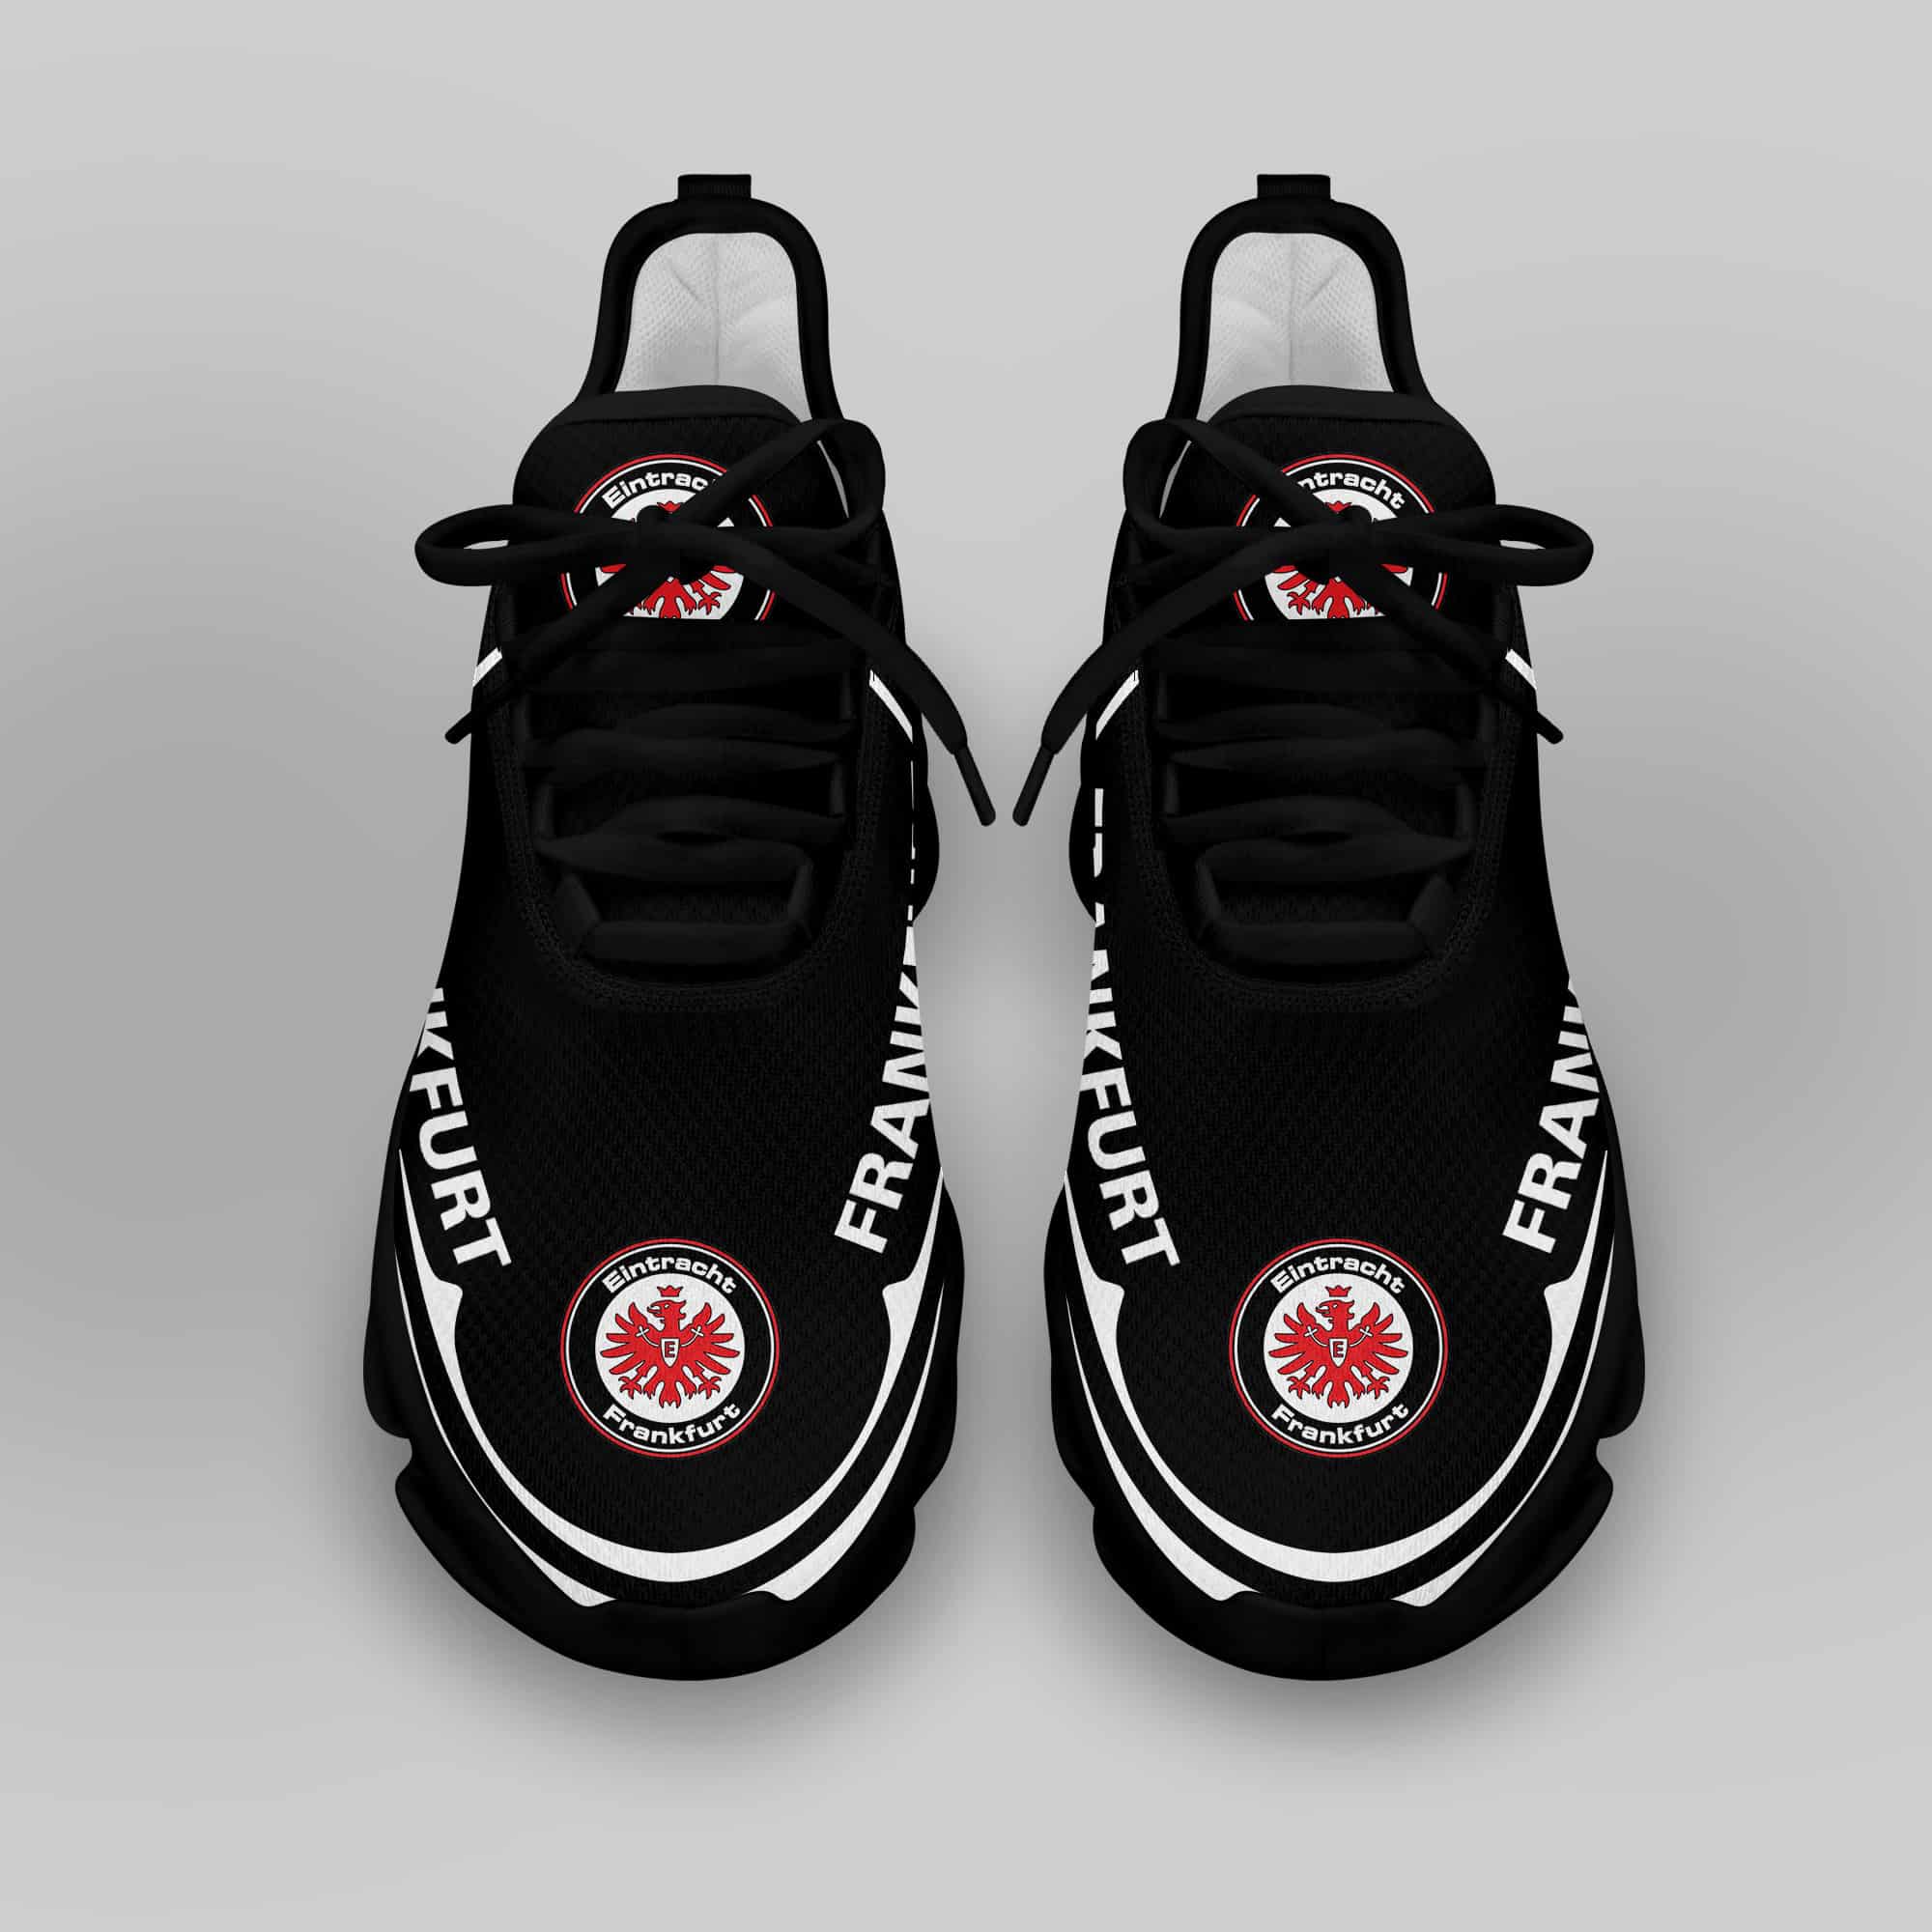 Eintracht Frankfurt Running Shoes Max Soul Shoes Sneakers Ver 21 4